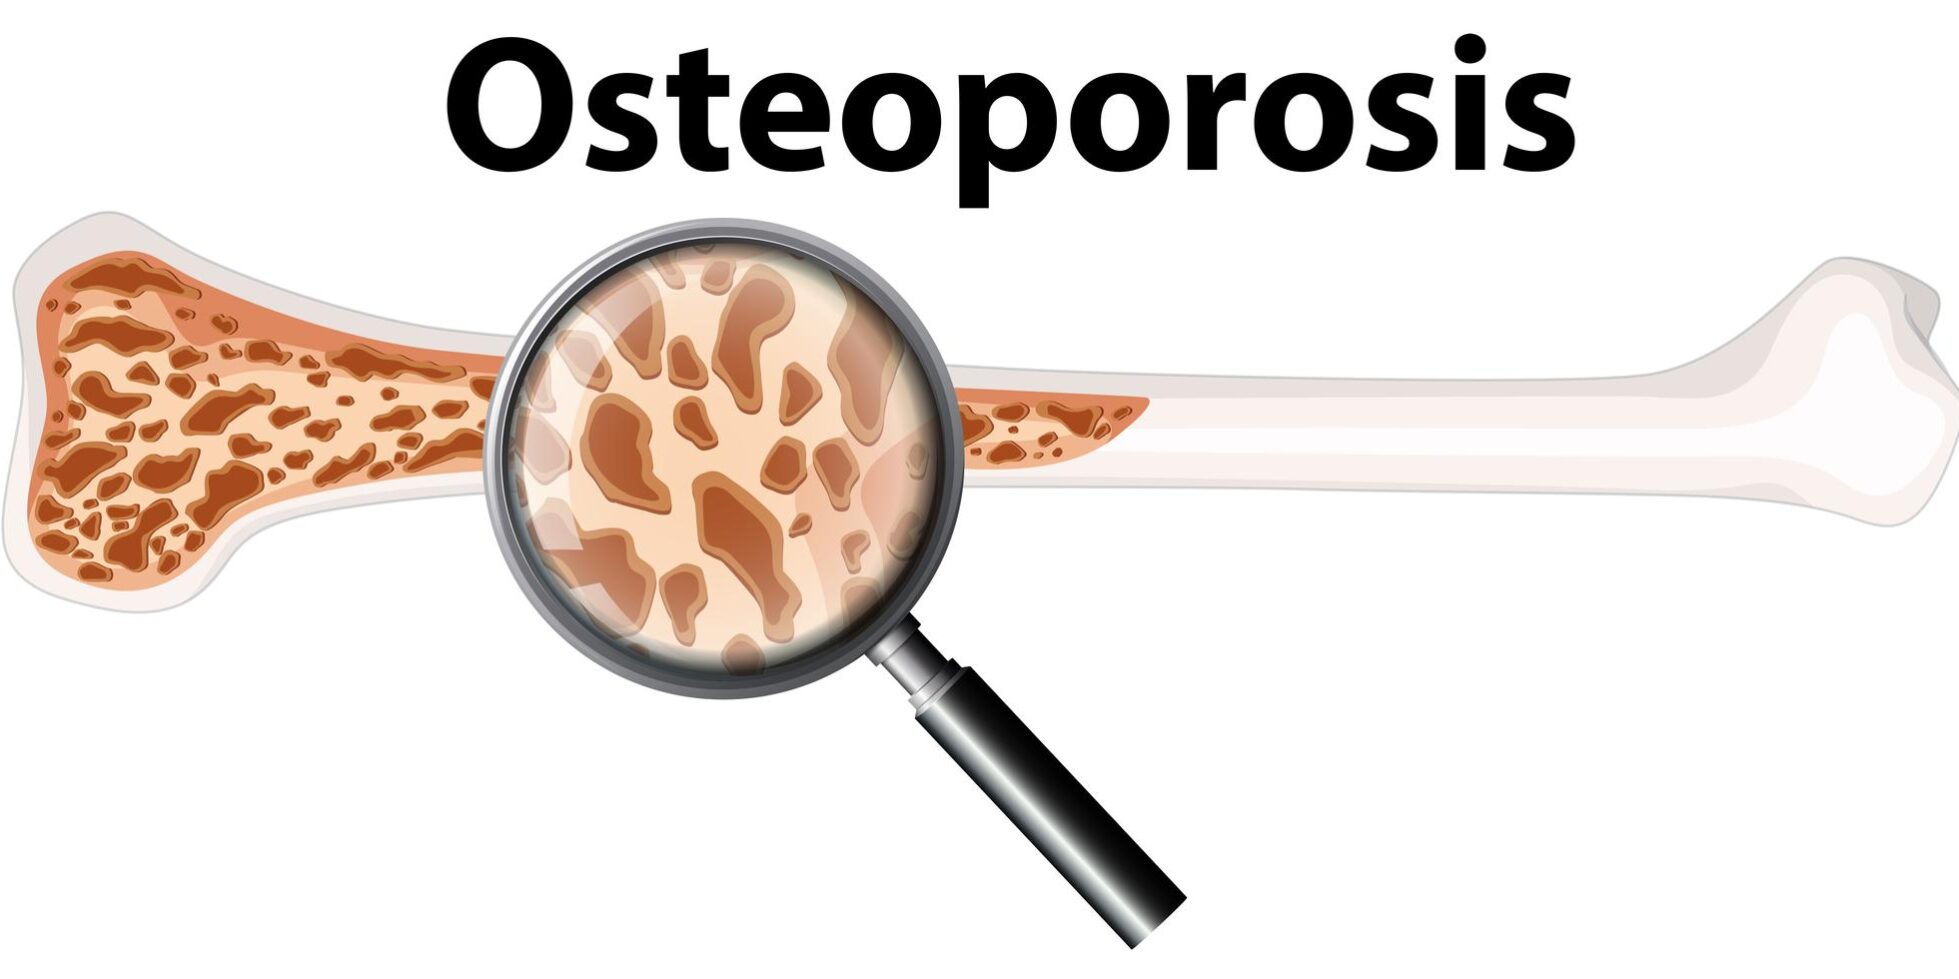 Osteoporosis - Symptoms and Causes